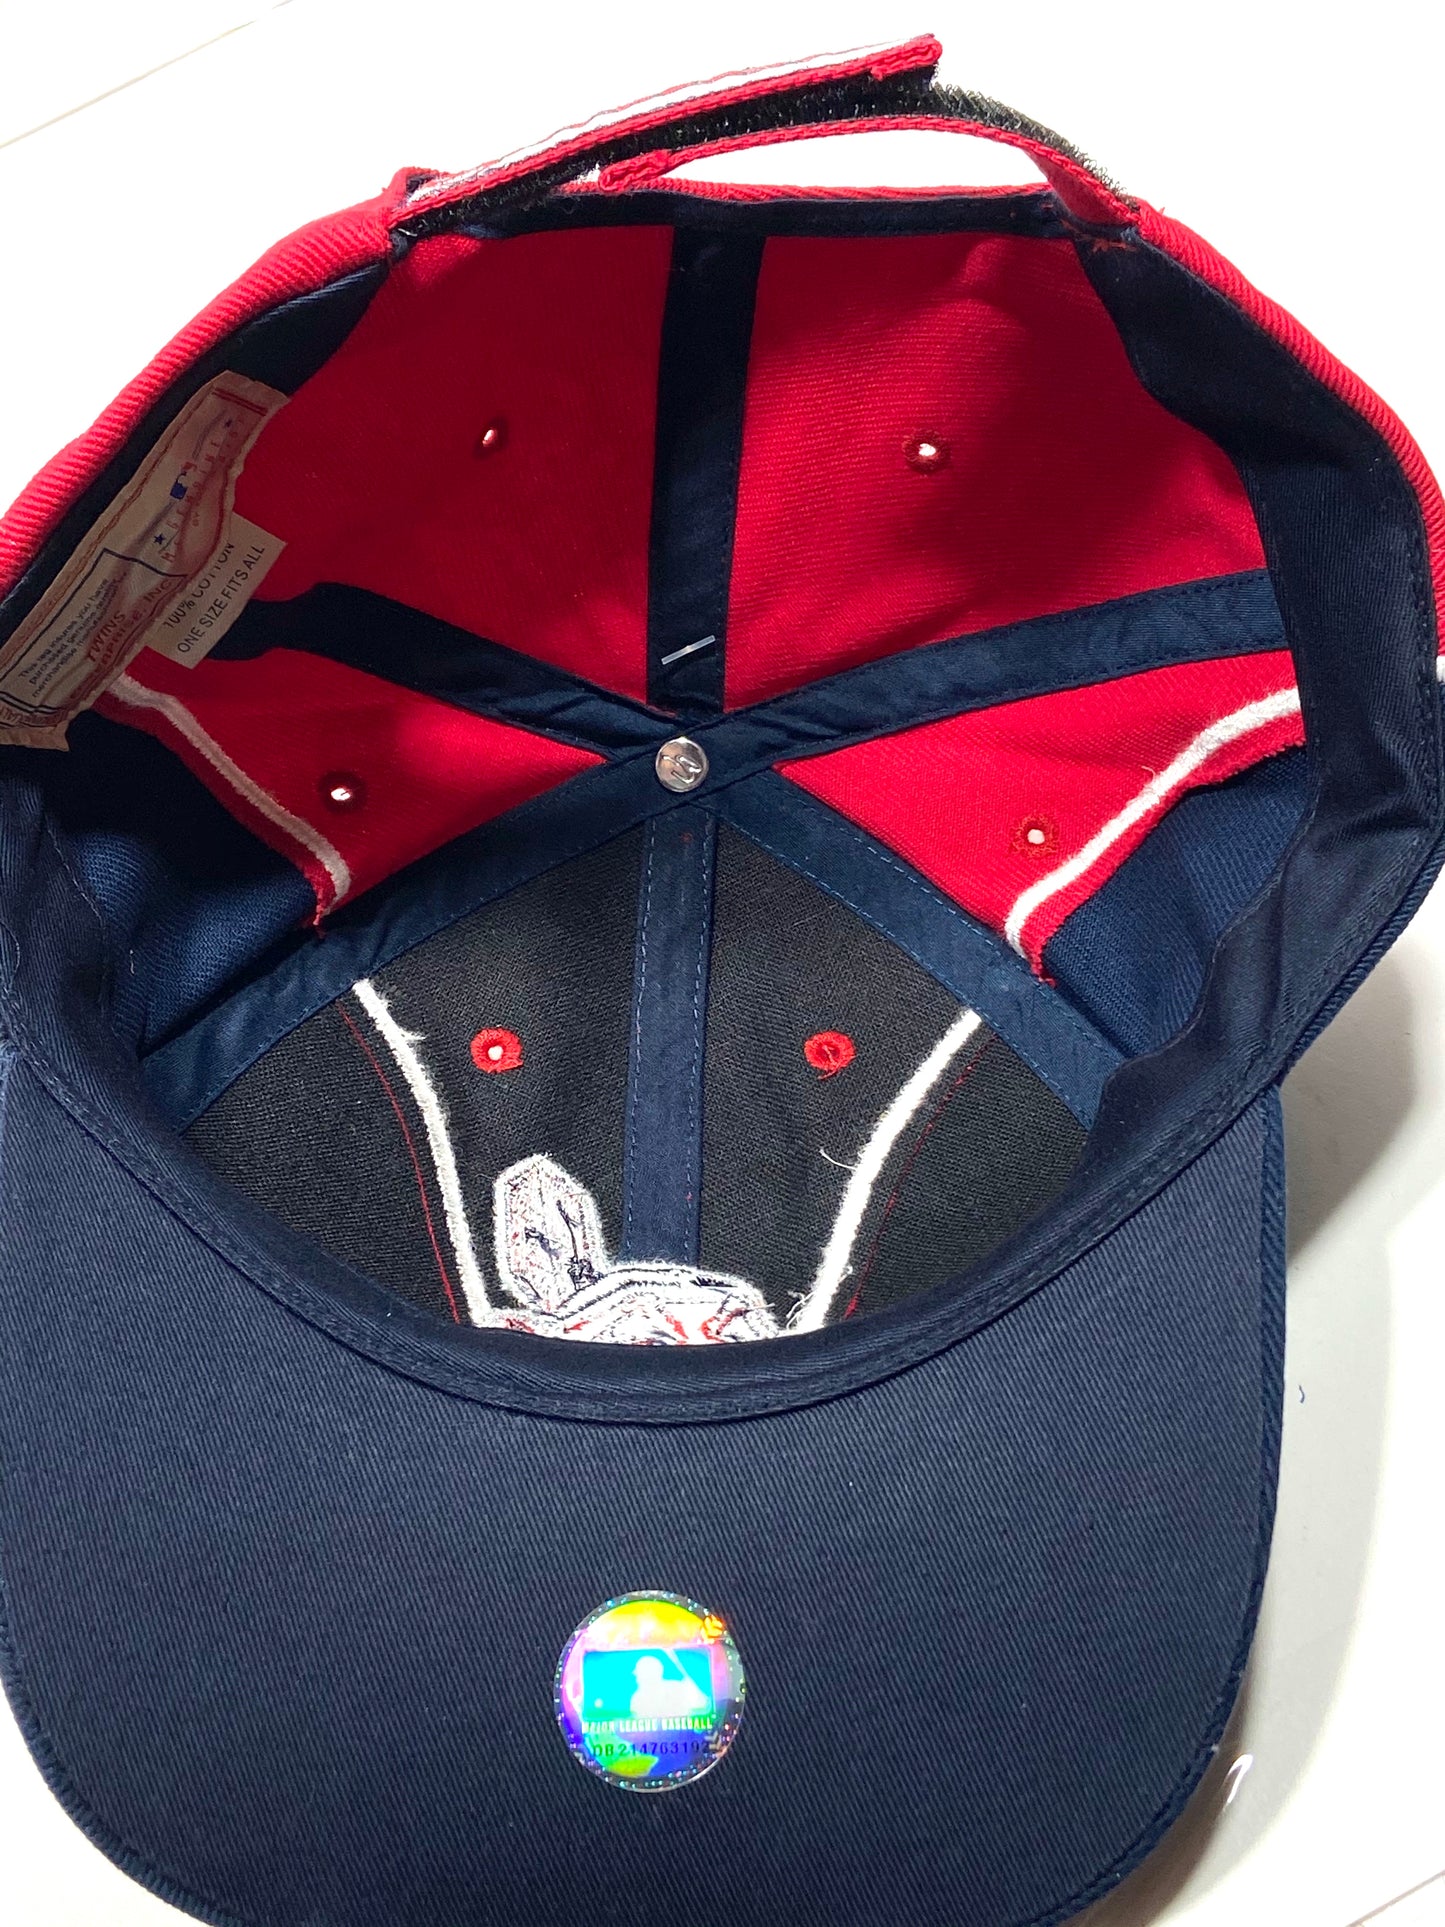 Cleveland Red Sox/Boston Indians (What?) MLB Vintage Hat by Twins Enterprise